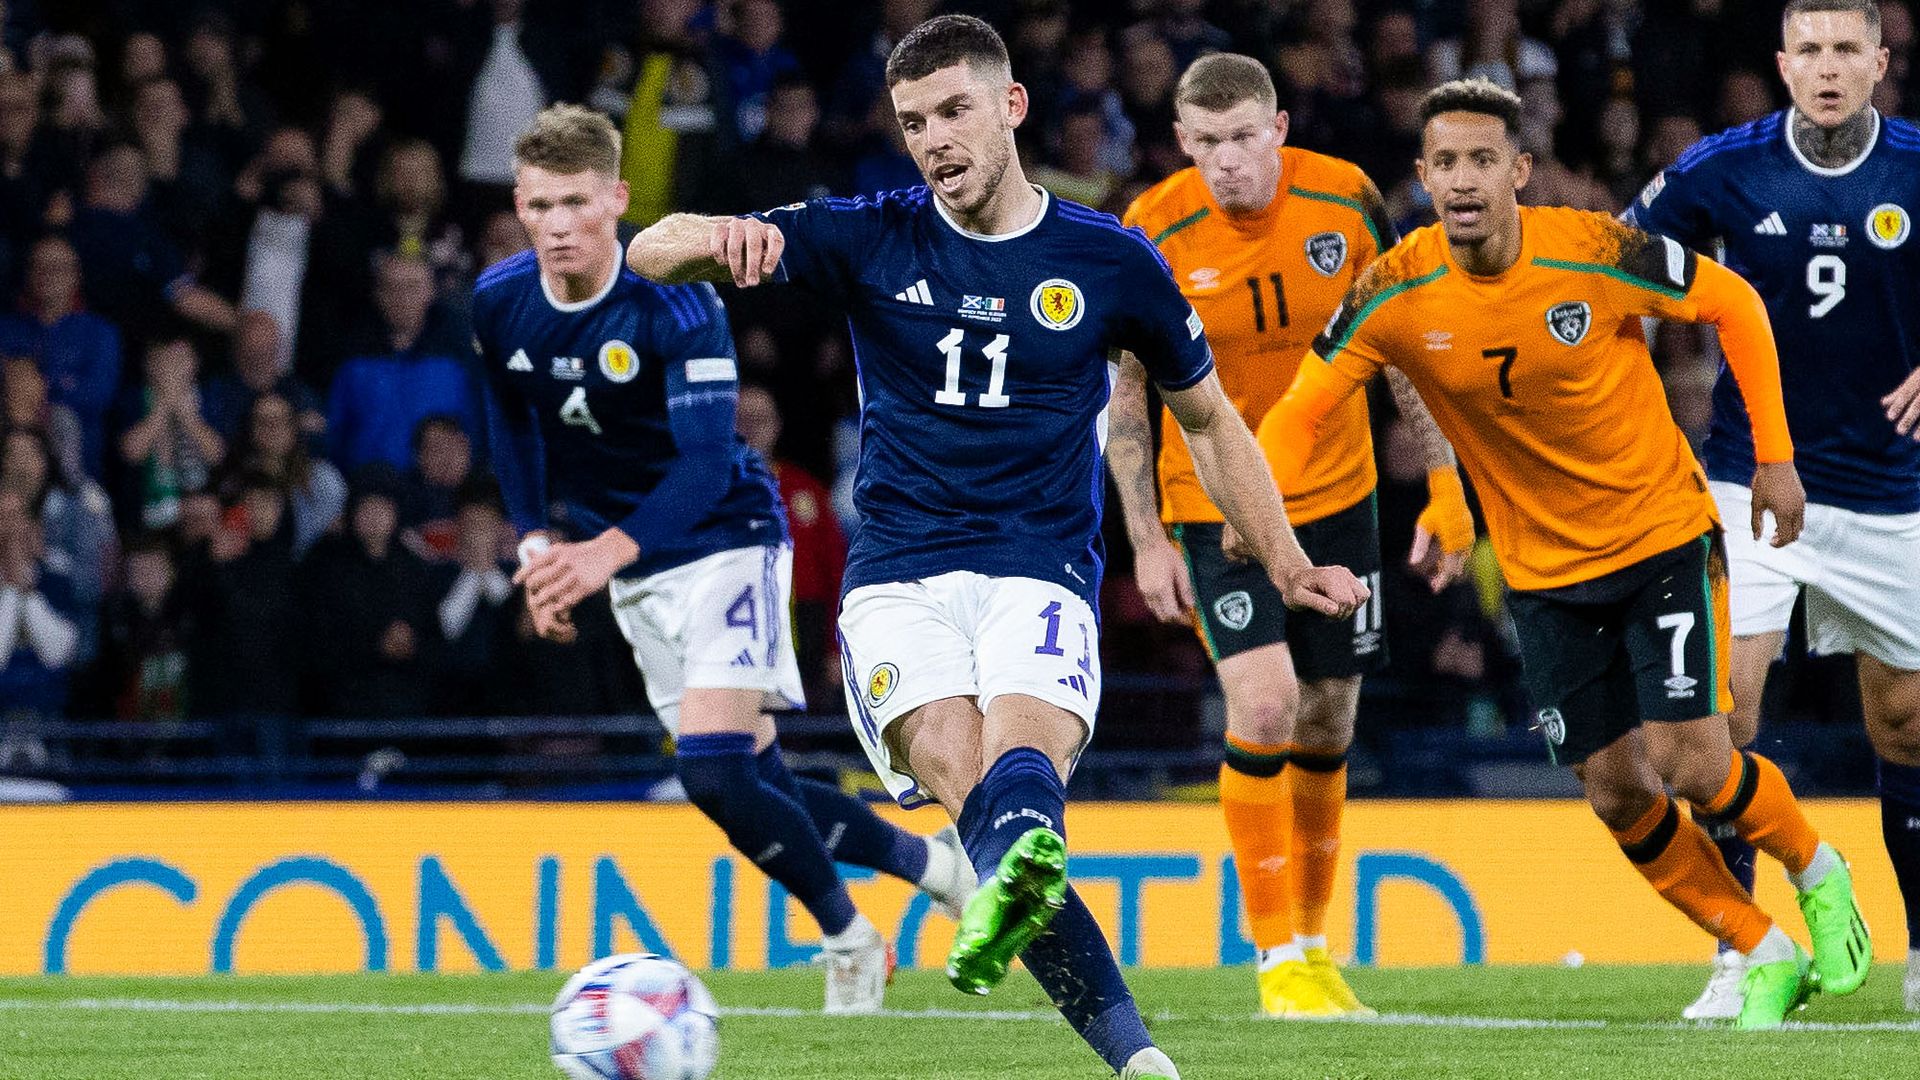 Christie penalty sends Scotland top after win over Rep of Ireland